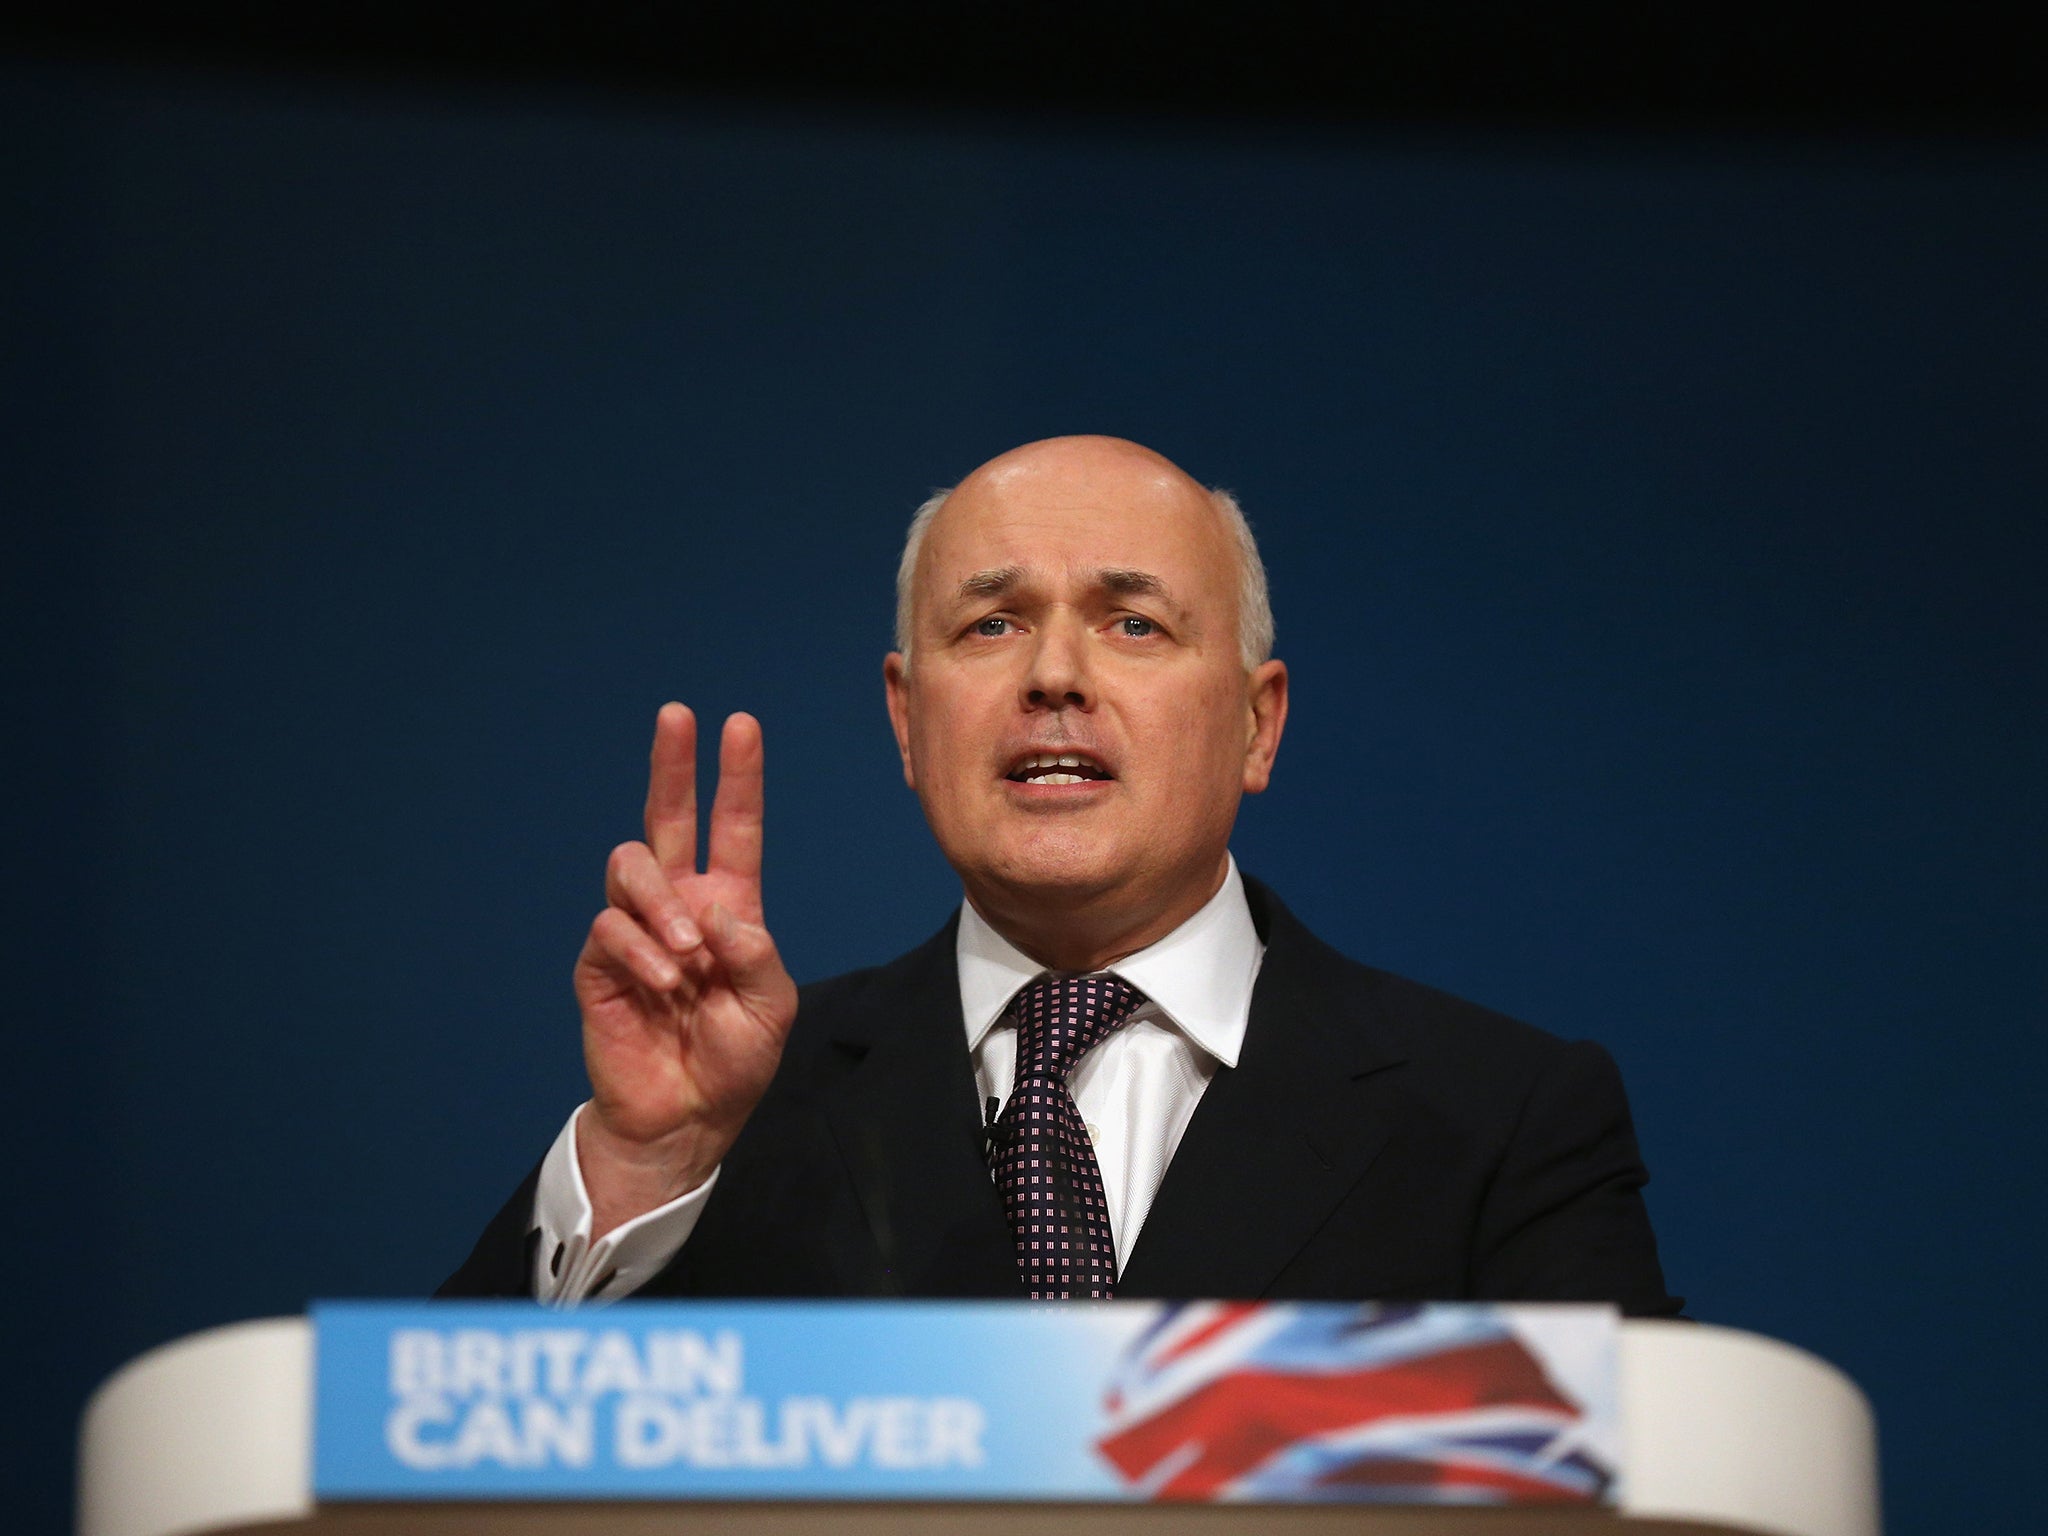 Iain Duncan Smith is sympathetic to the argument that Britain leaves the EU